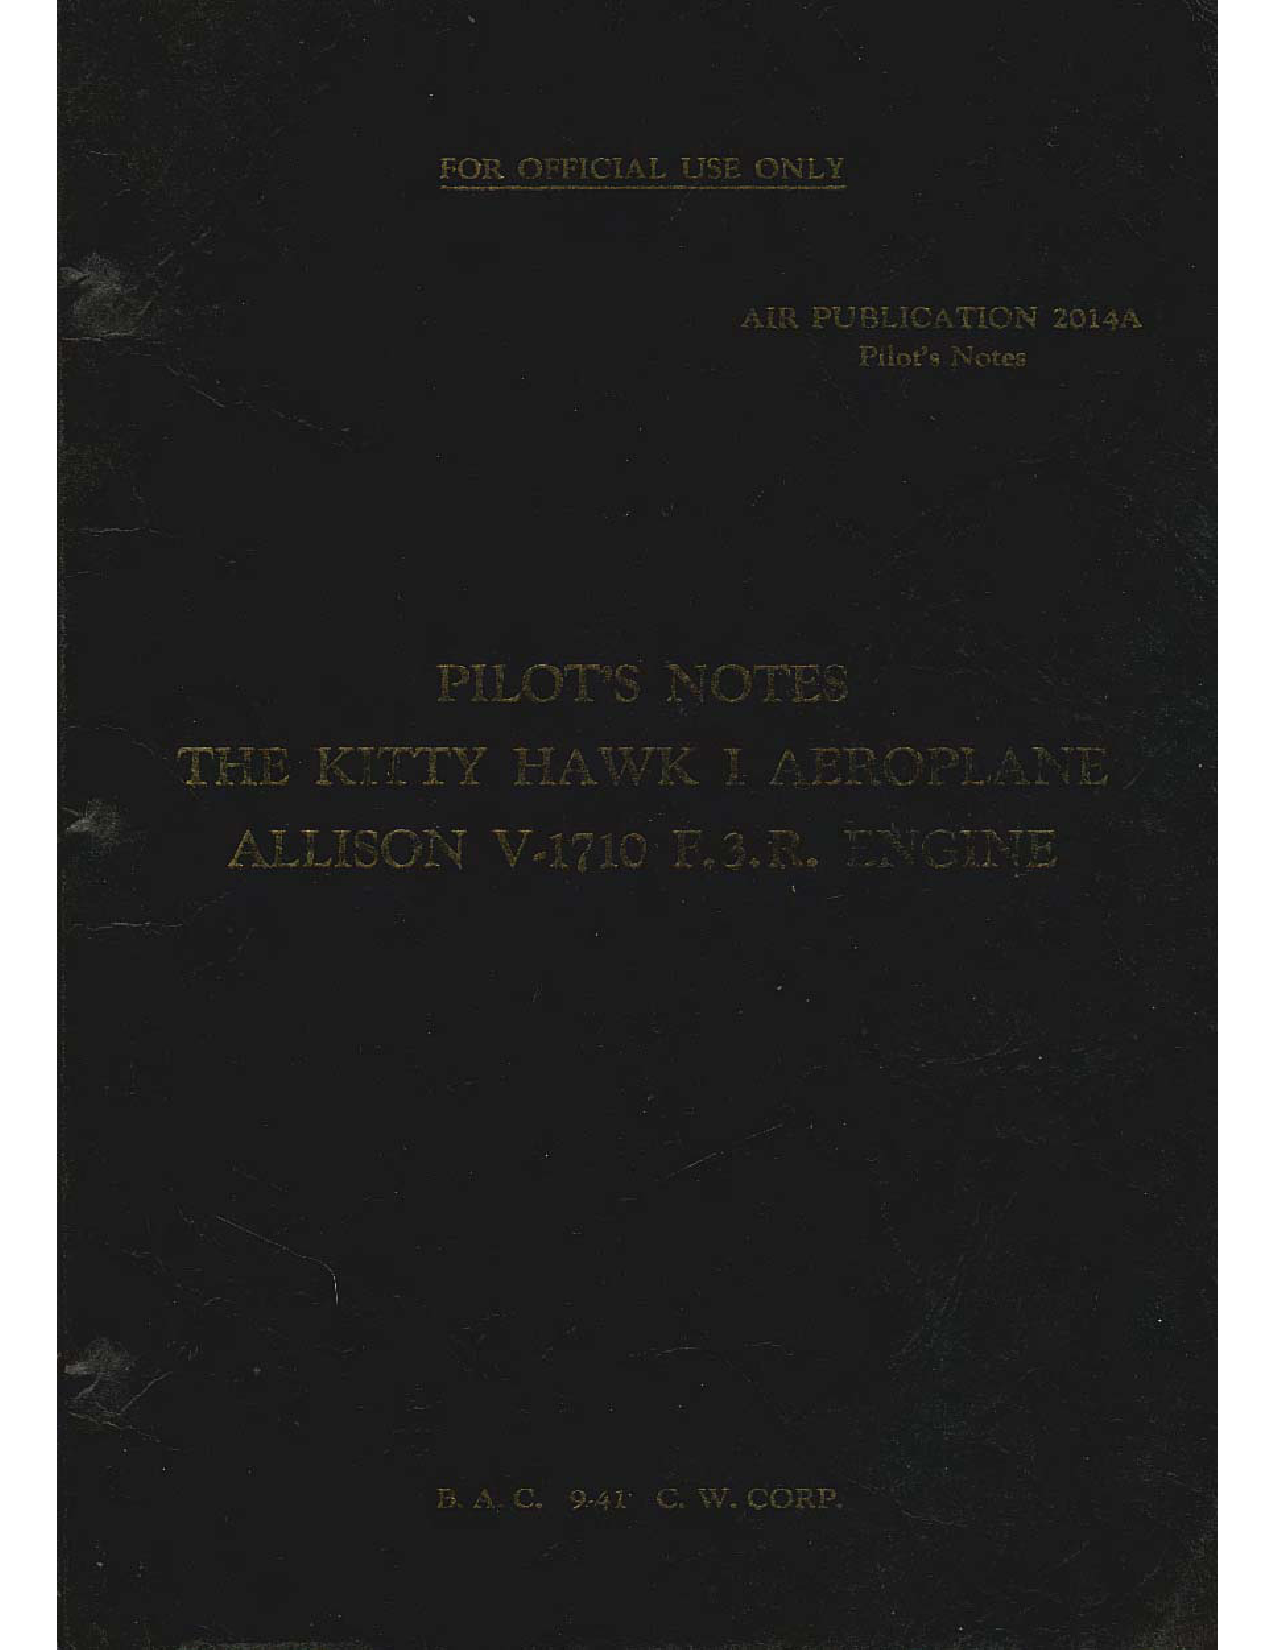 Sample page 1 from AirCorps Library document: Pilot's Notes - Kittyhawk I